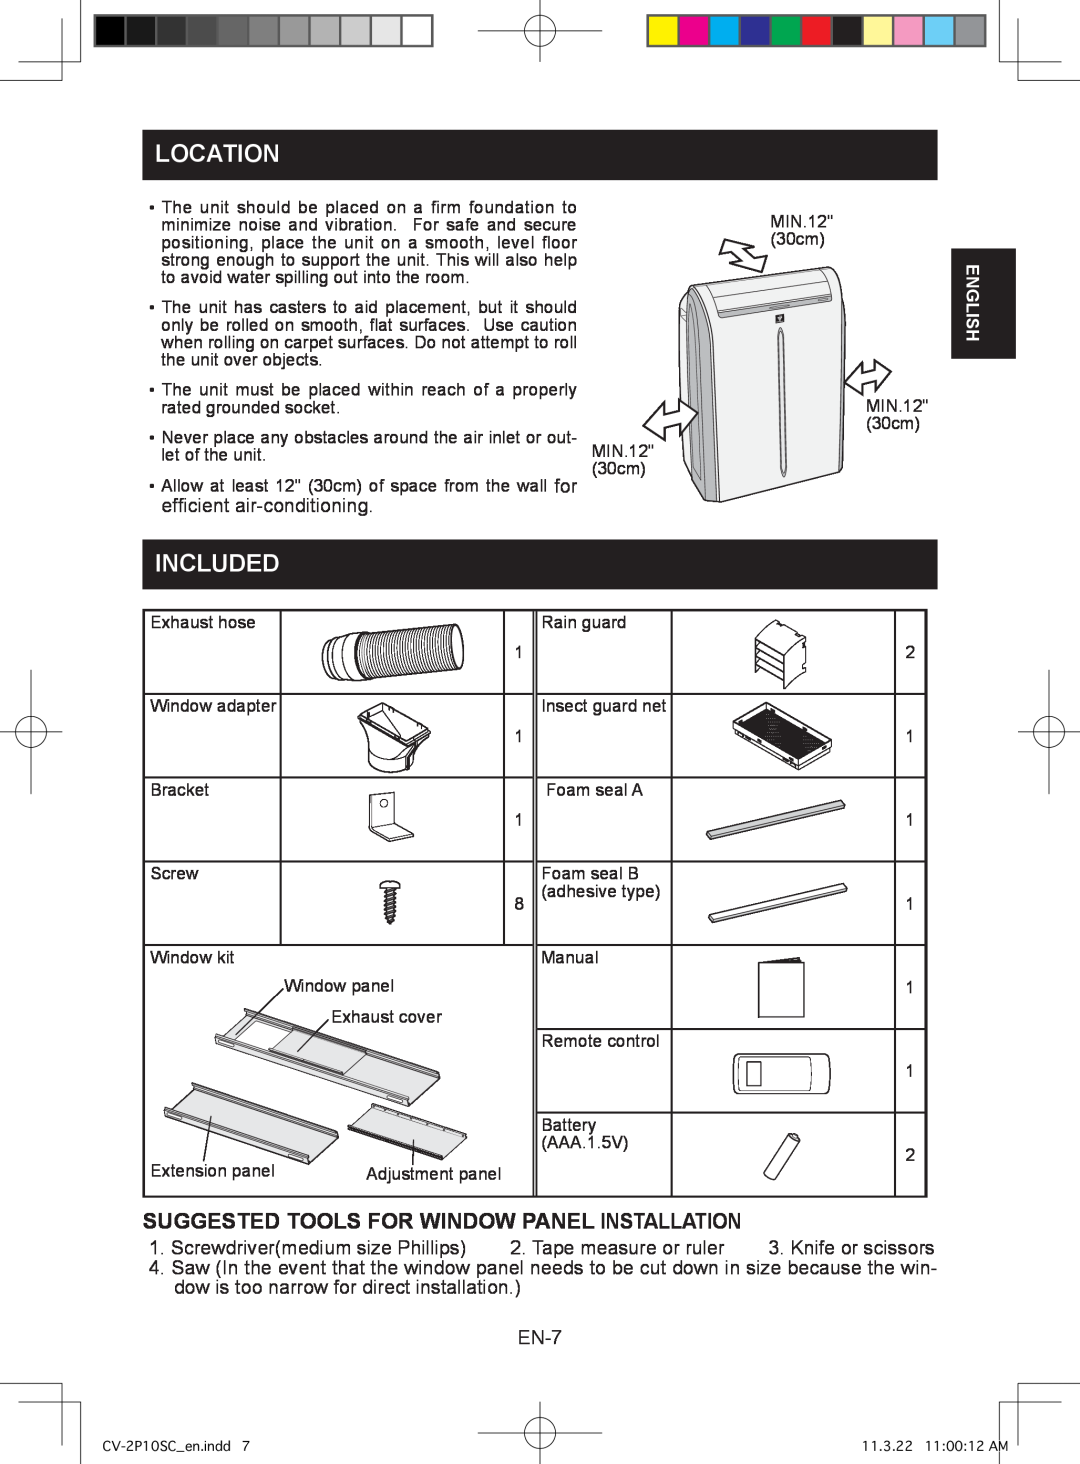 Sharp CV-2P10SC operation manual Location, Included, Suggested Tools For Window Panel Installation 